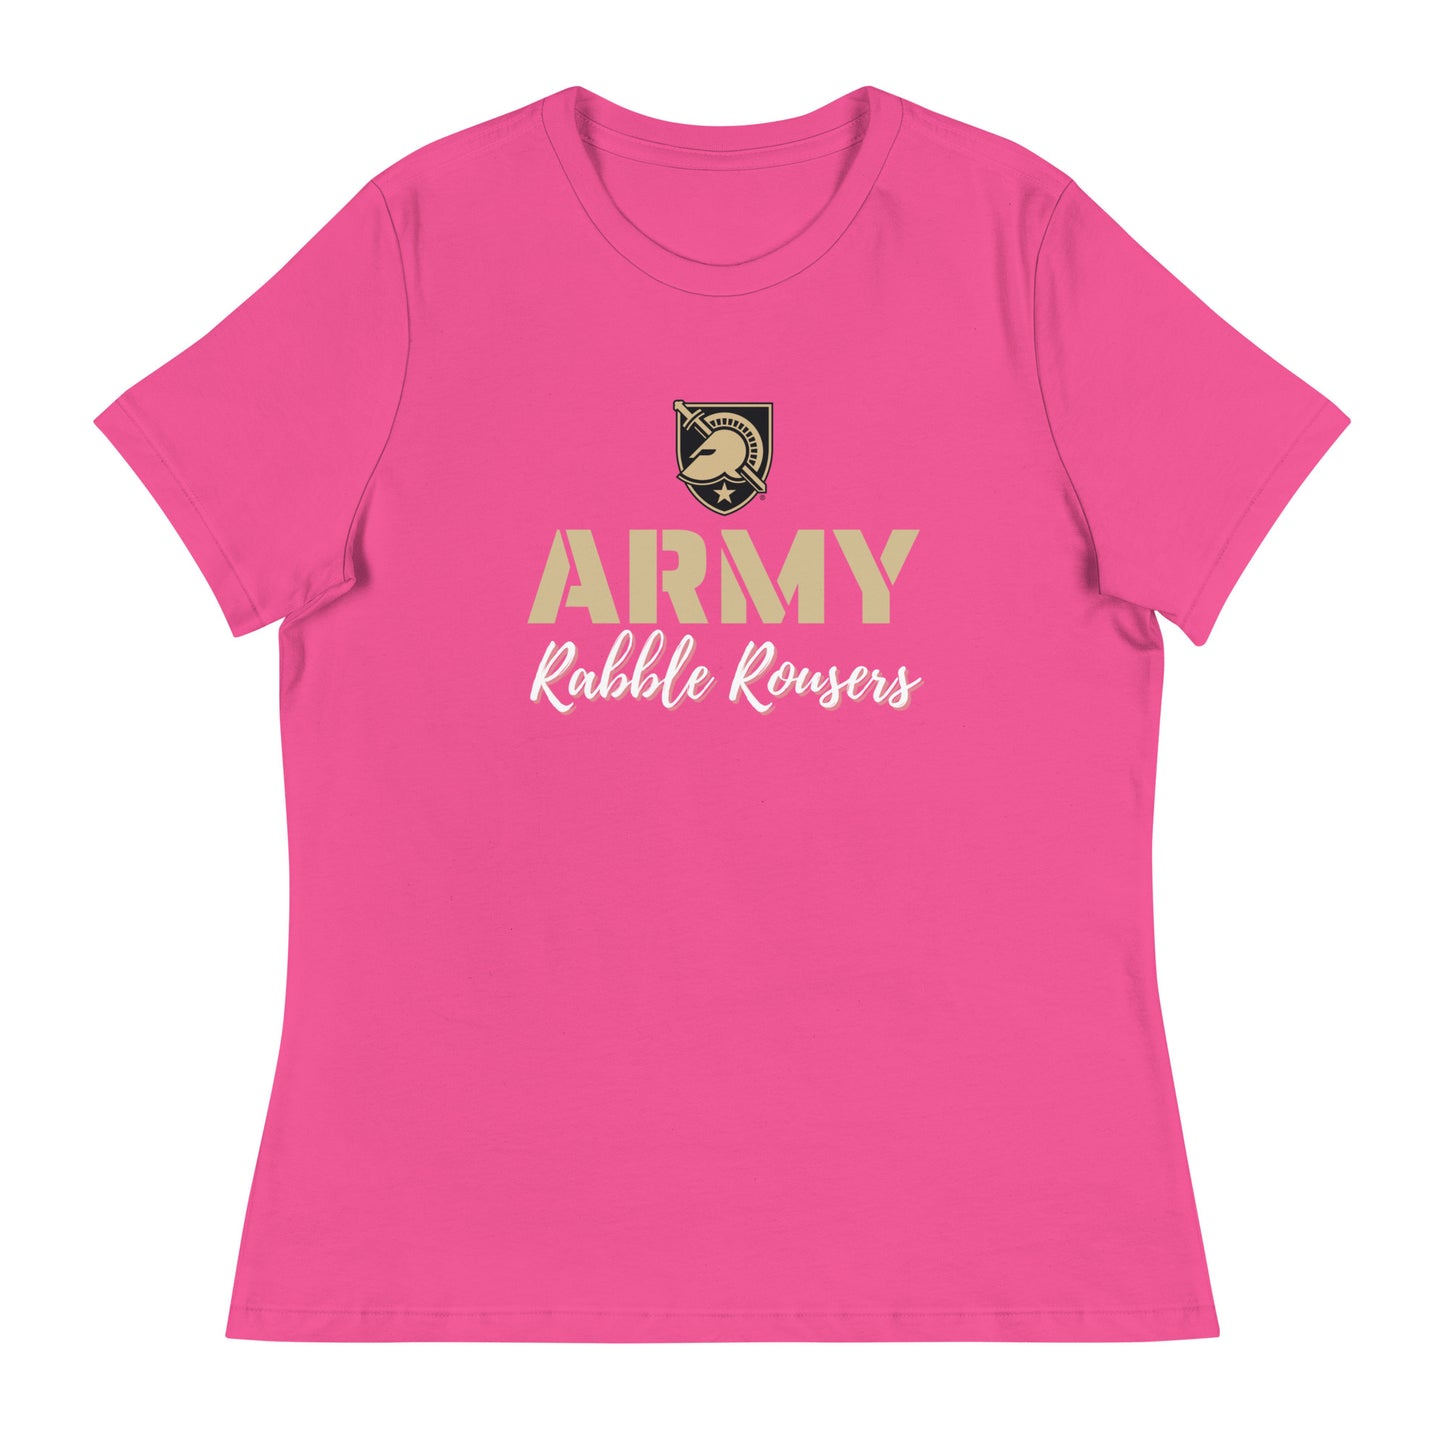 "Army Rabble Rousers" Women's Relaxed T-Shirt